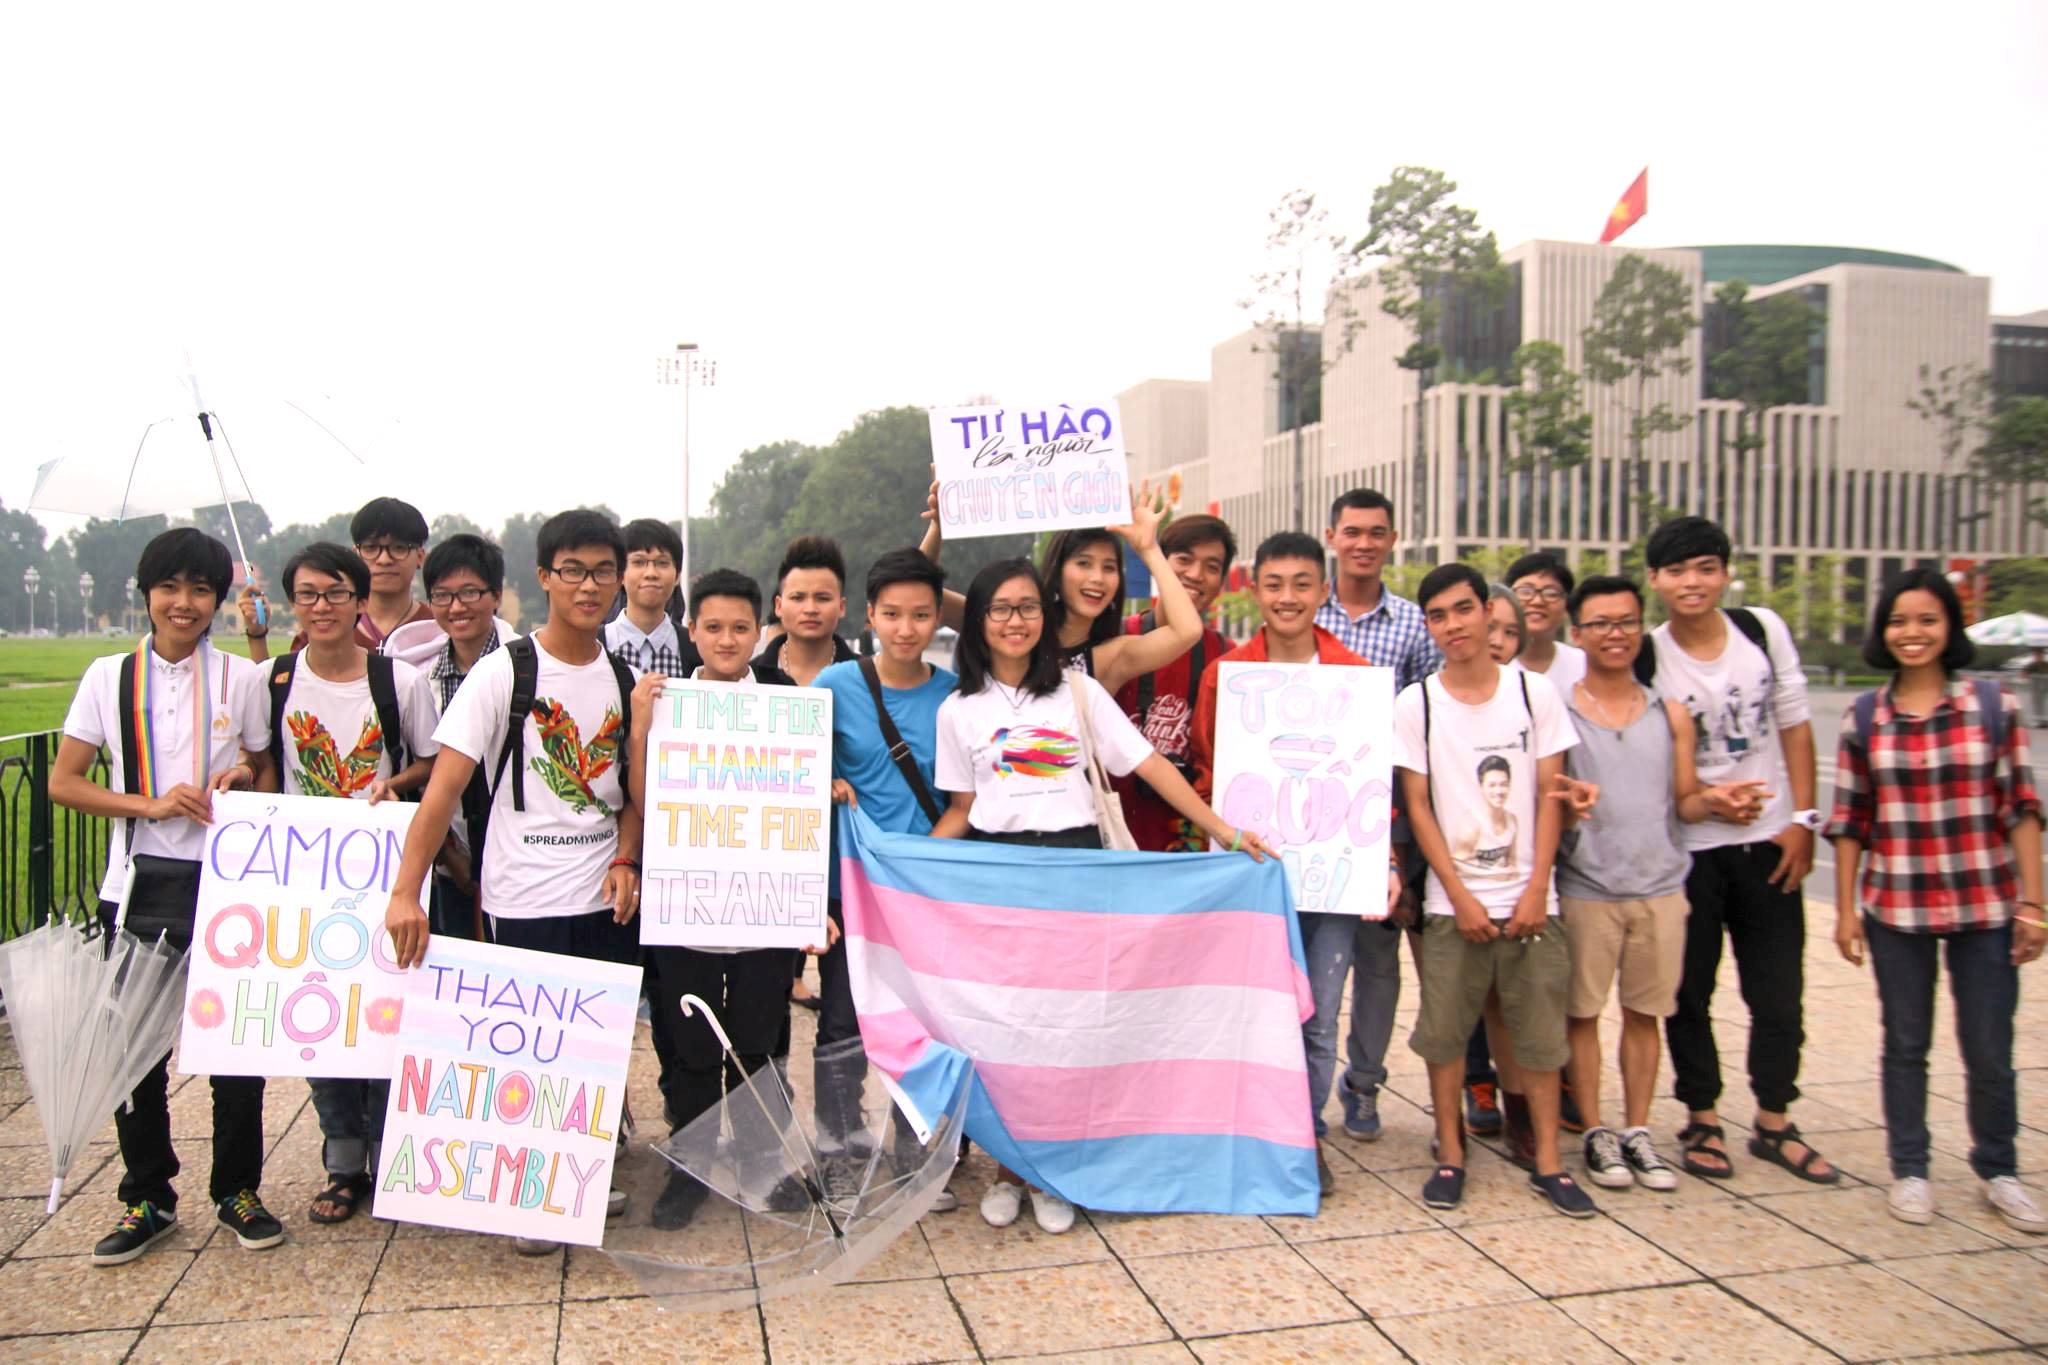 Many LGBT activists flock to the streets in Hanoi to applaud the new legislation. They raise flags and boards, some of which read “Cam on Quoc hoi” (Thank you, National Assembly). .jpg